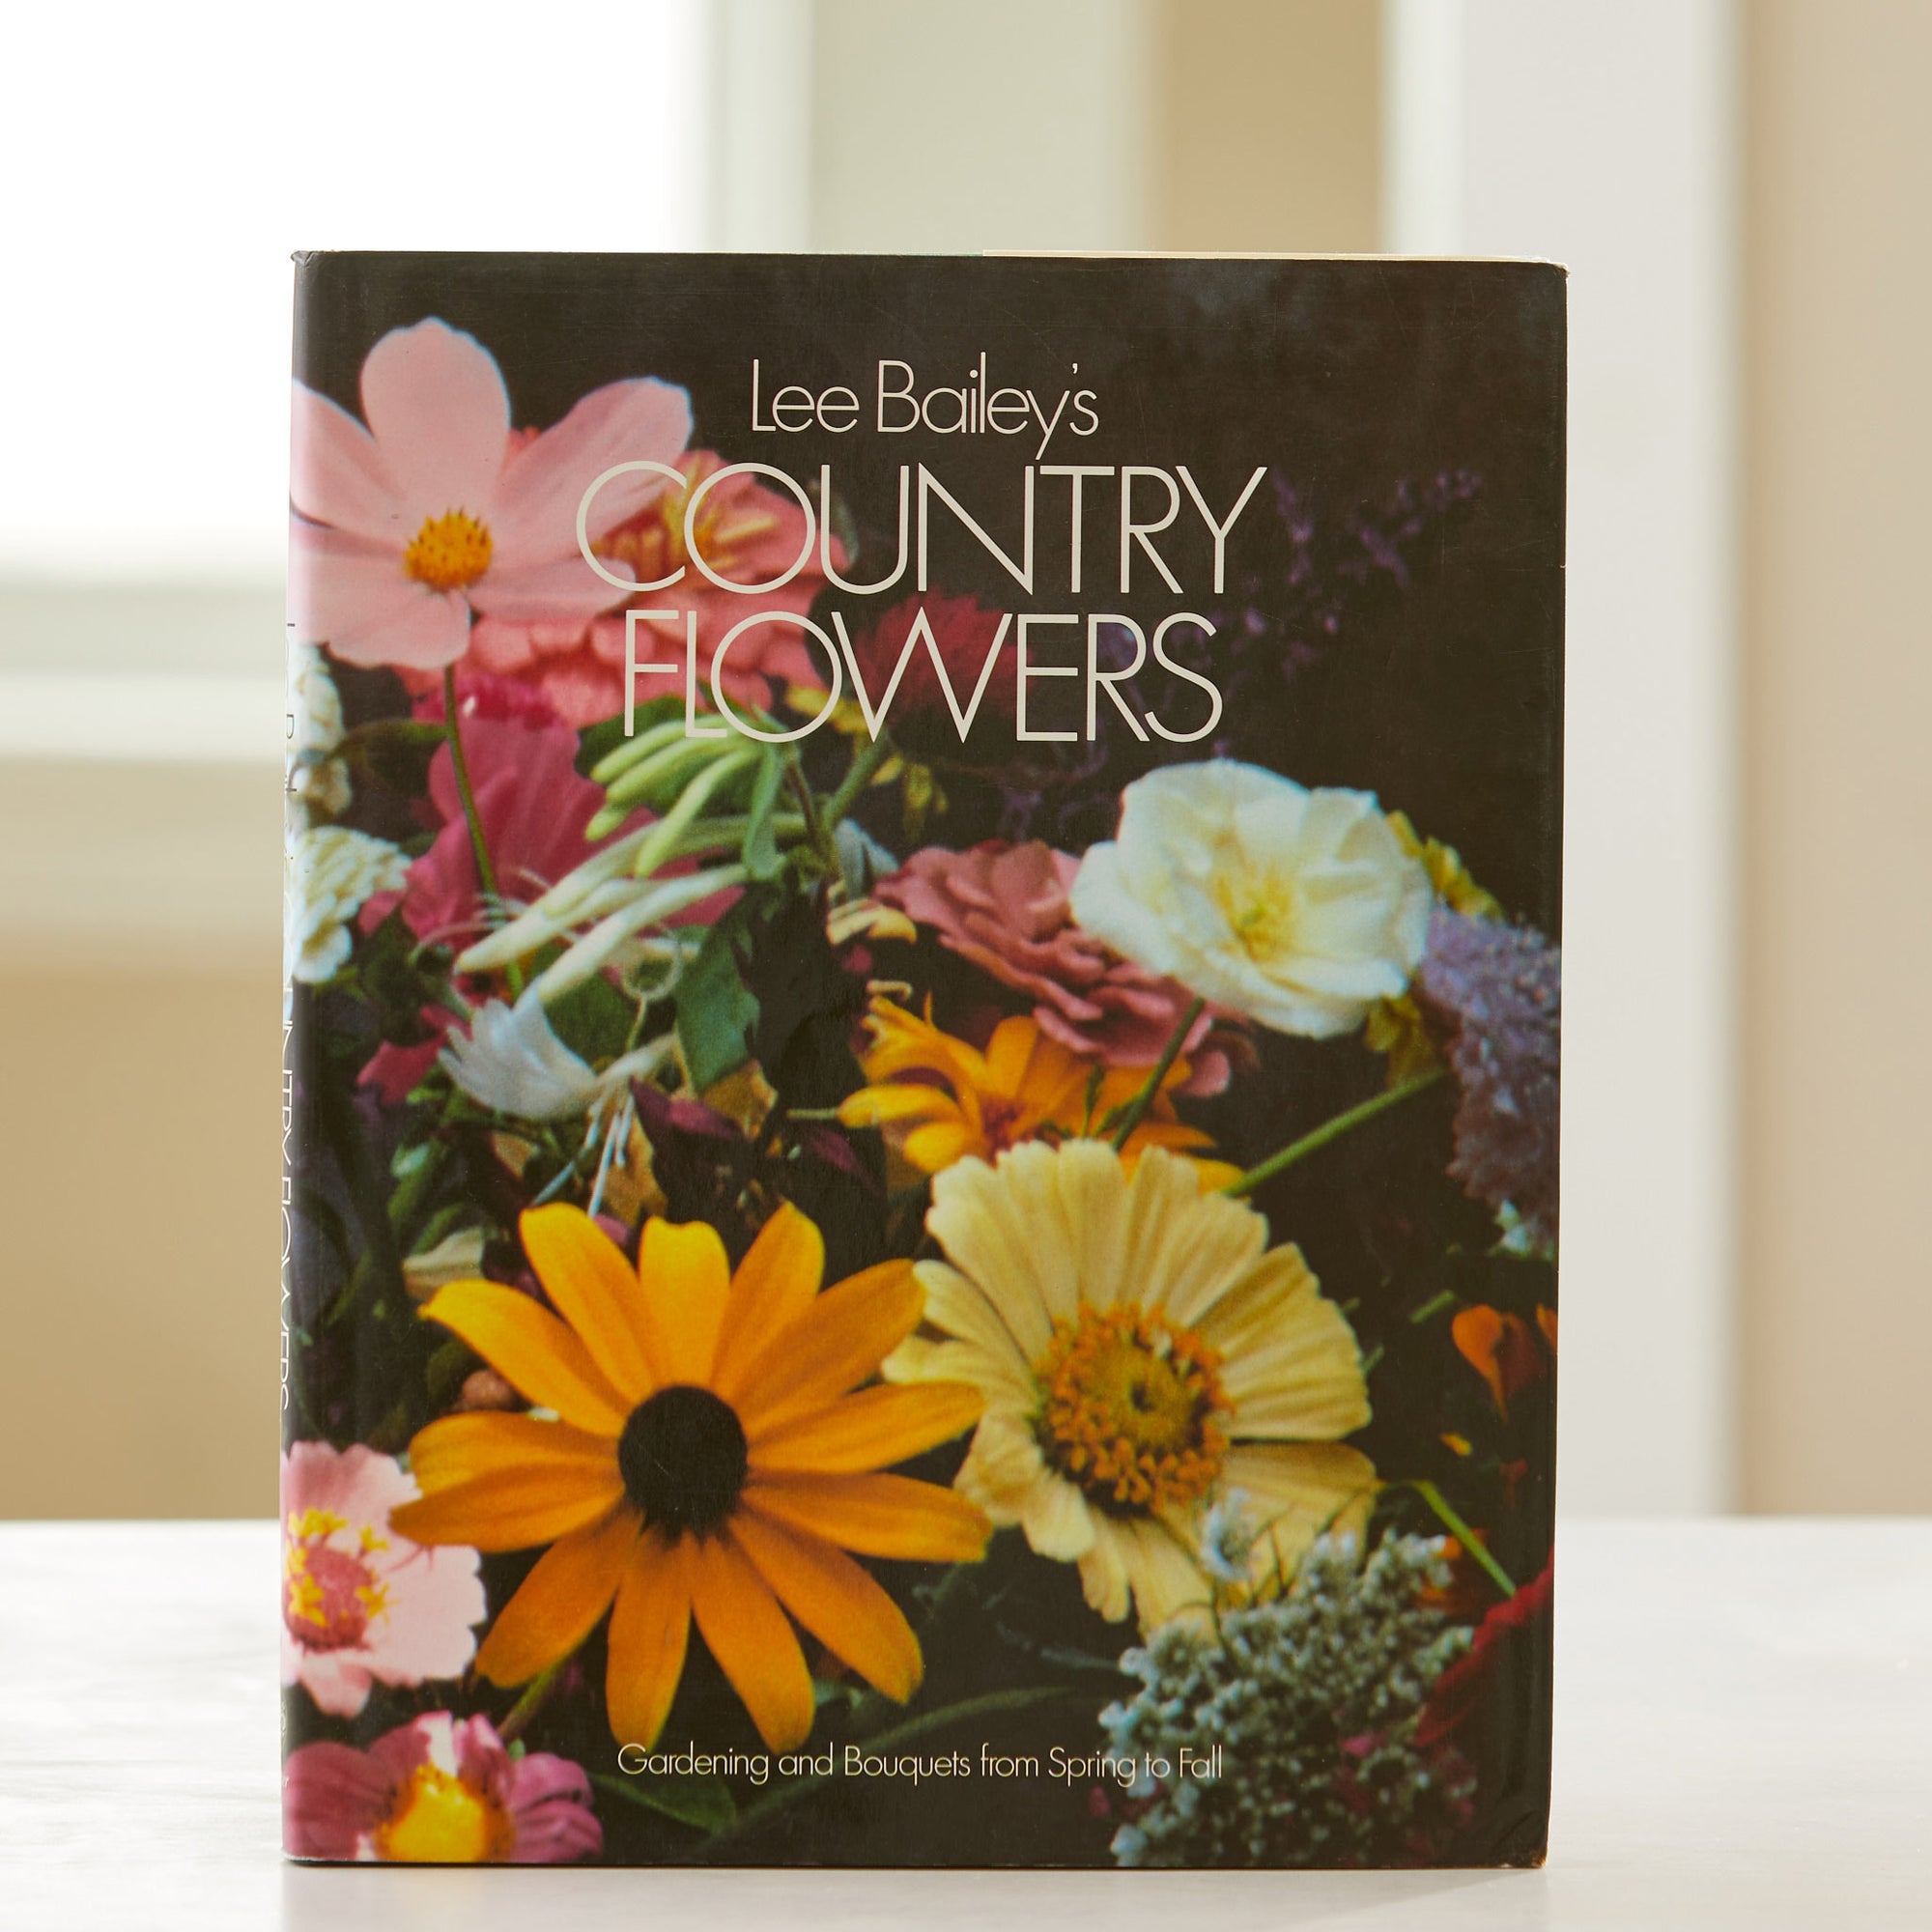 Lee Bailey’s County Flowers. Monthly gardening guide, April-Sept. Illustrates perennial plants & how to make a garden bed. Best flower gardening book.